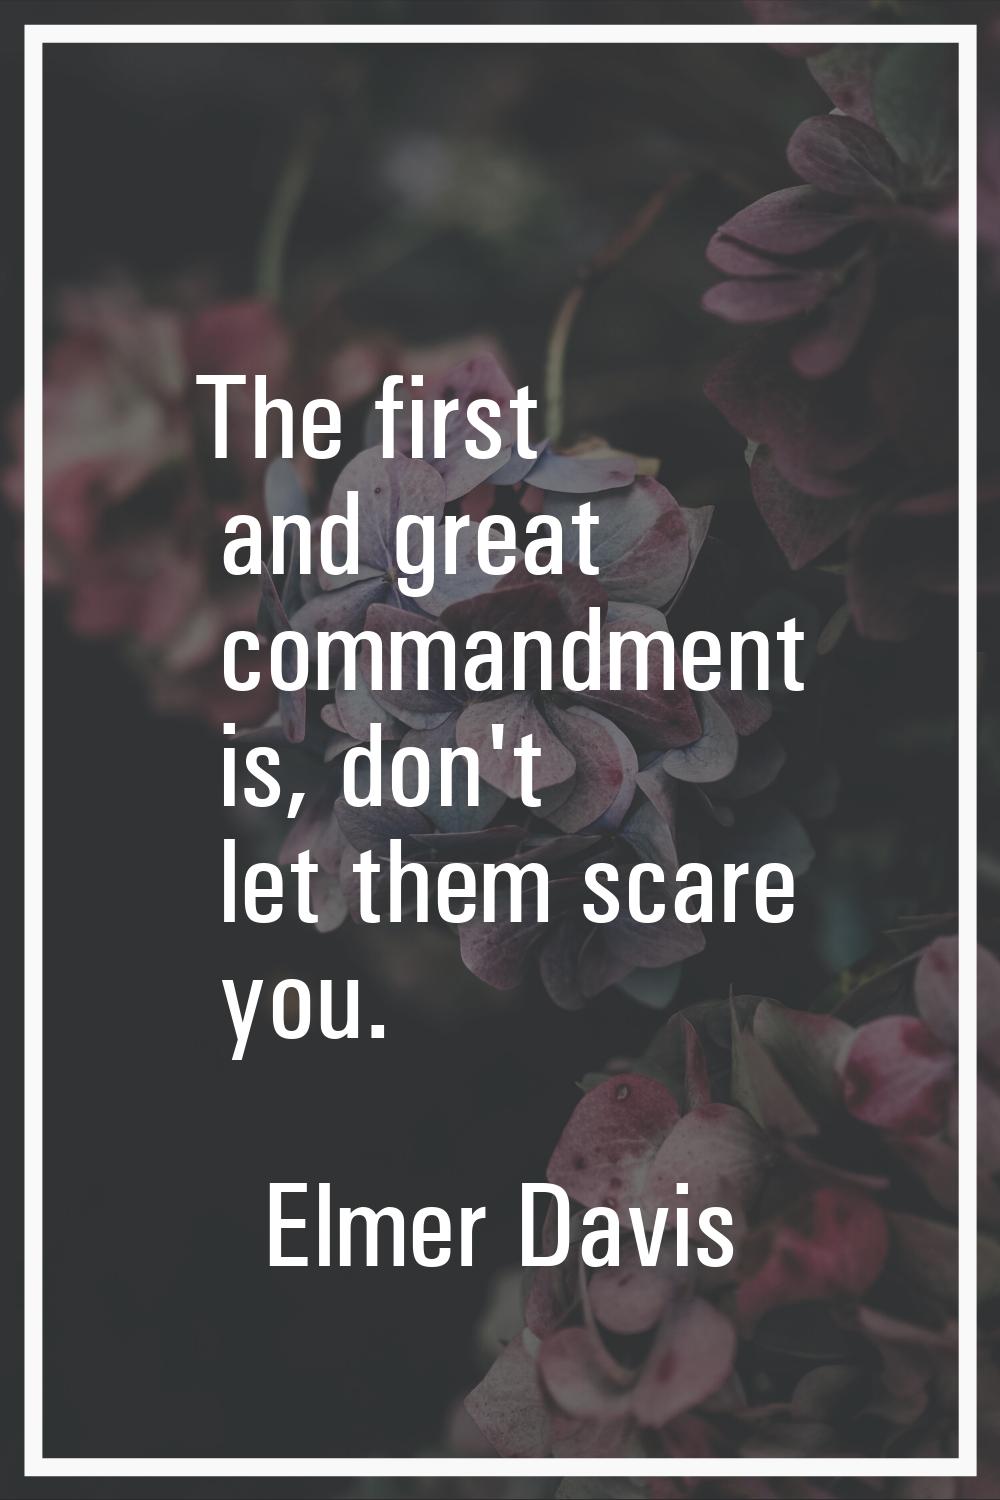 The first and great commandment is, don't let them scare you.